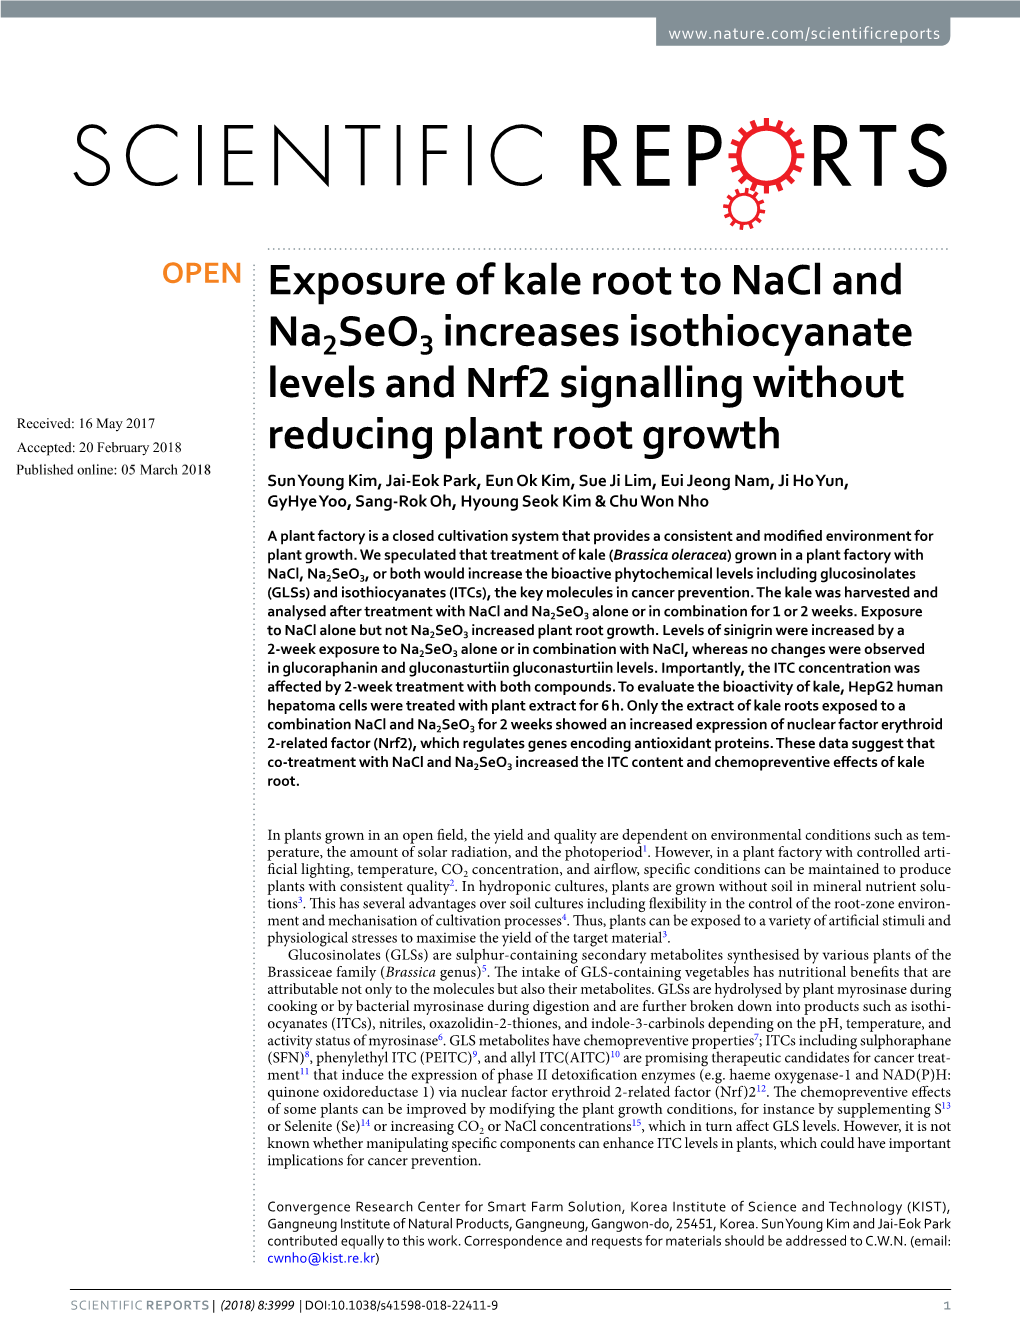 Exposure of Kale Root to Nacl and Na2seo3 Increases Isothiocyanate